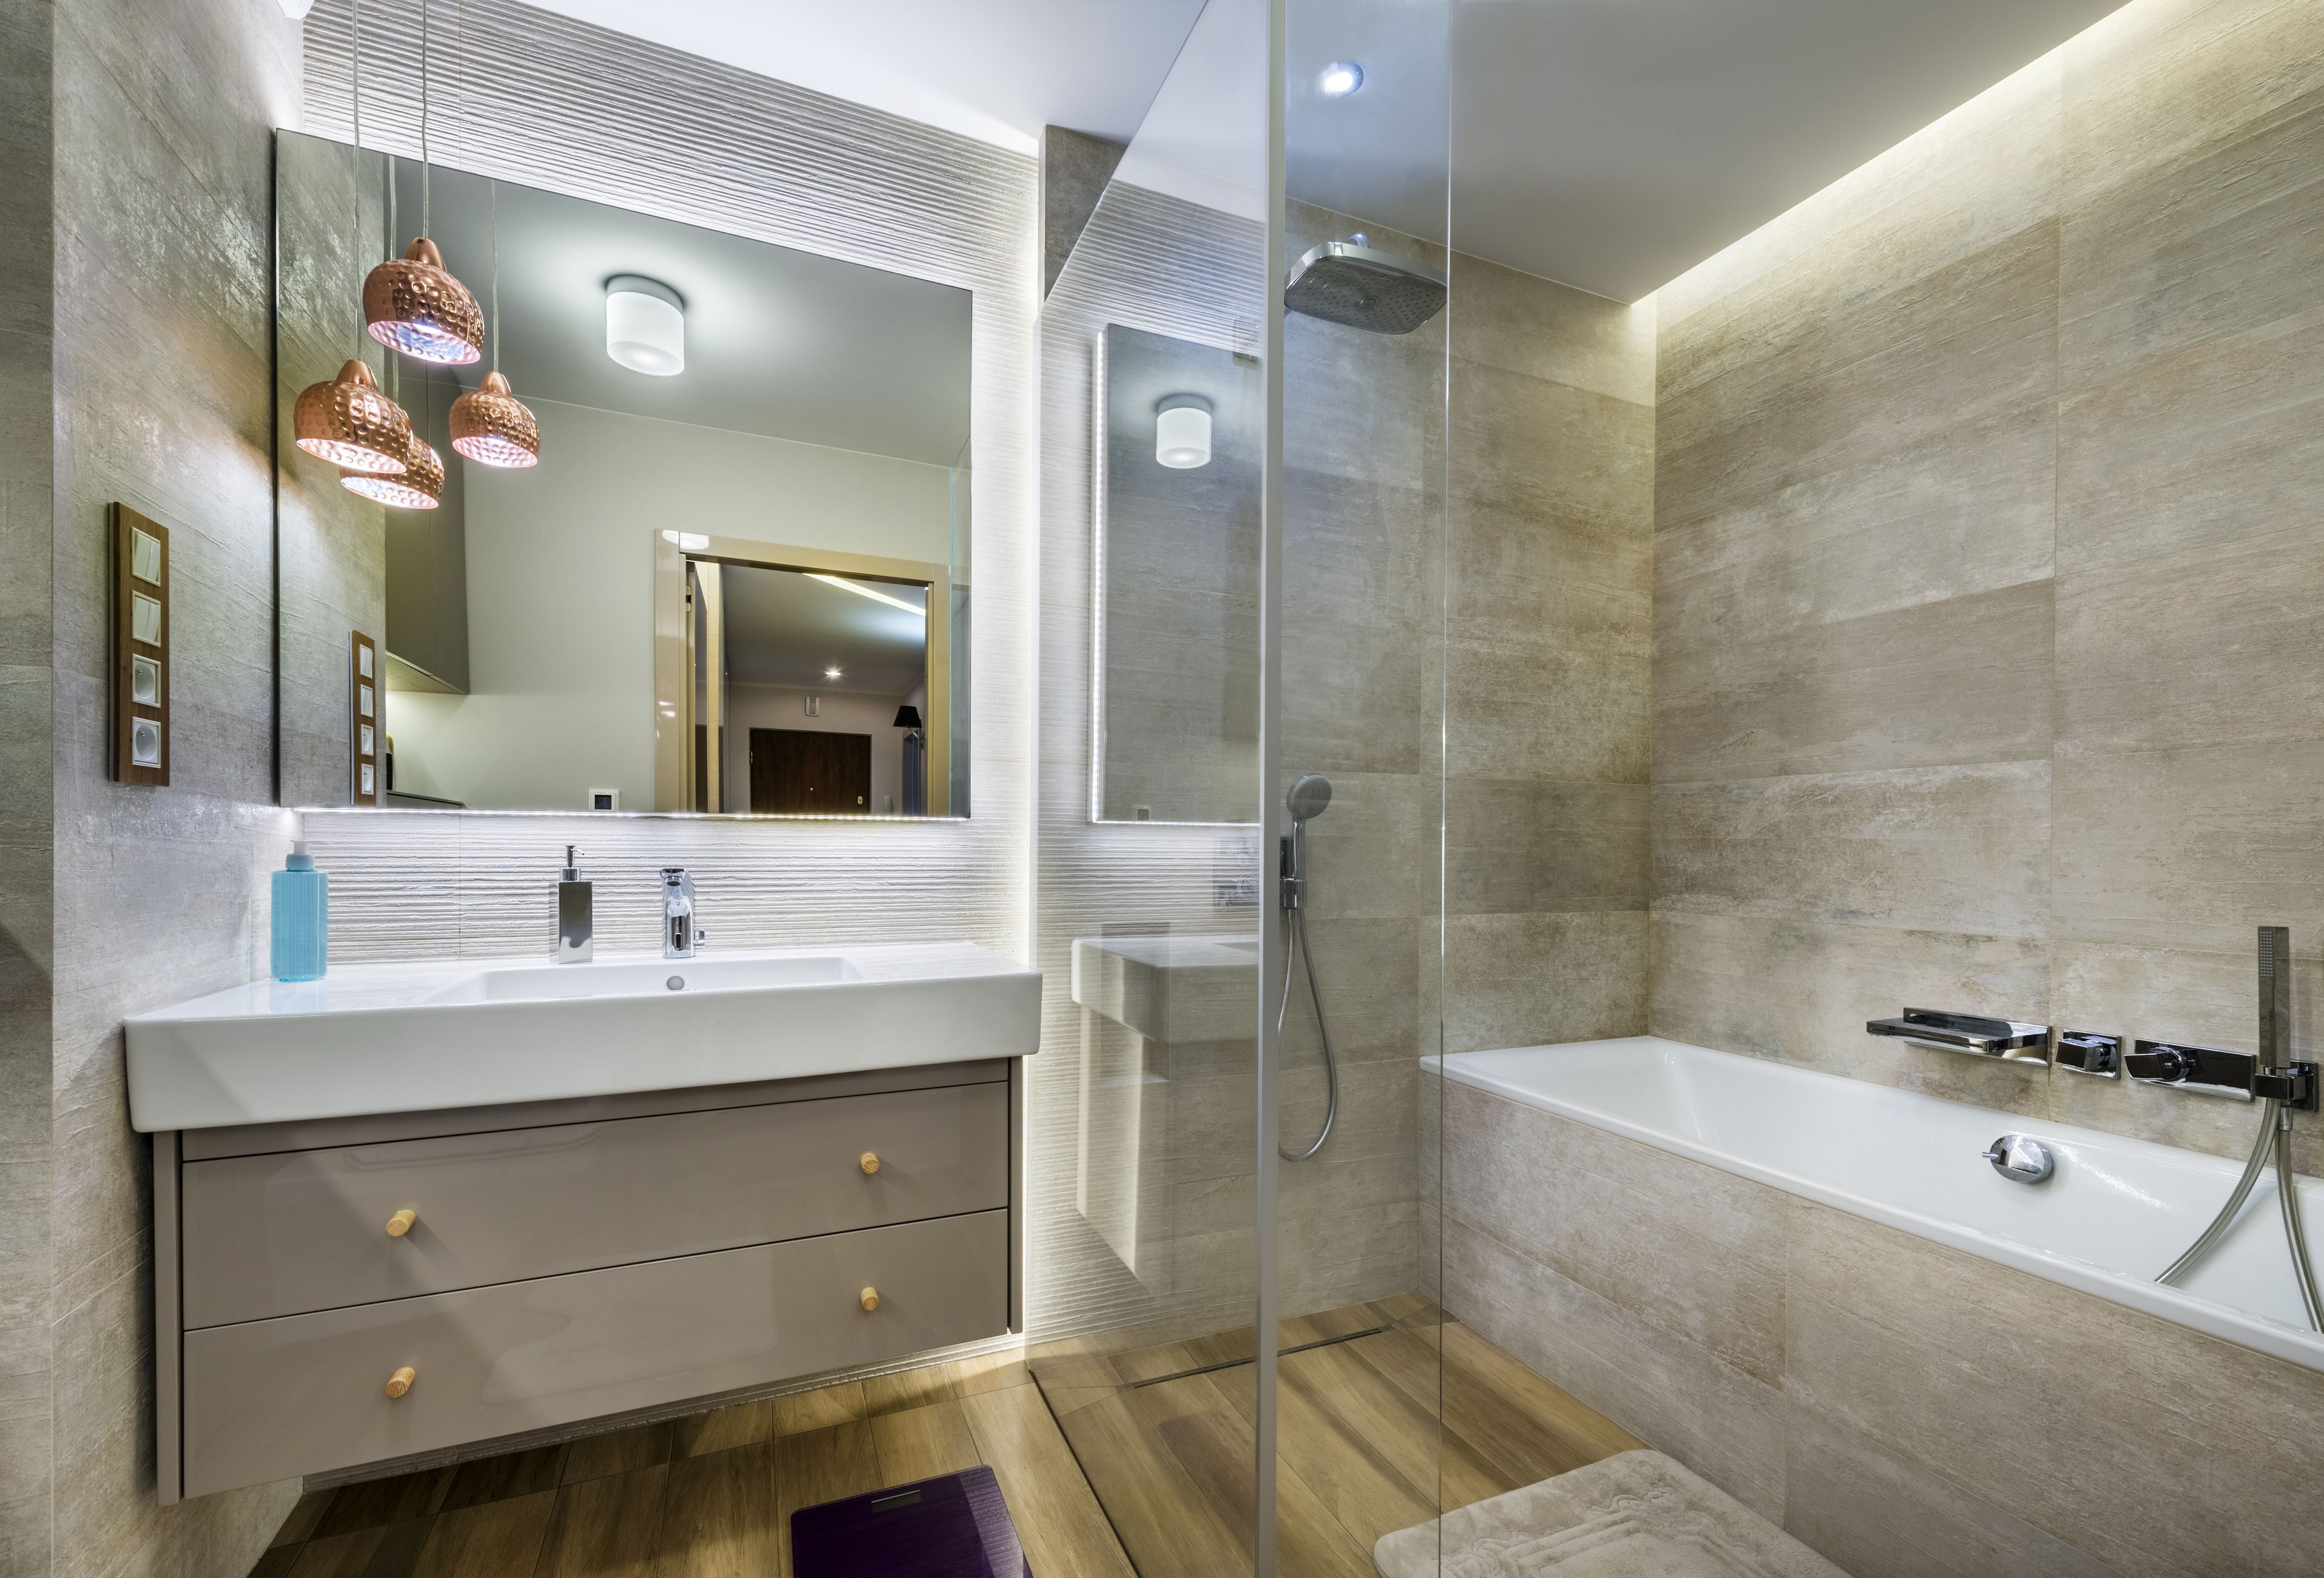 Requirements for Electrical Wiring in a Bathroom